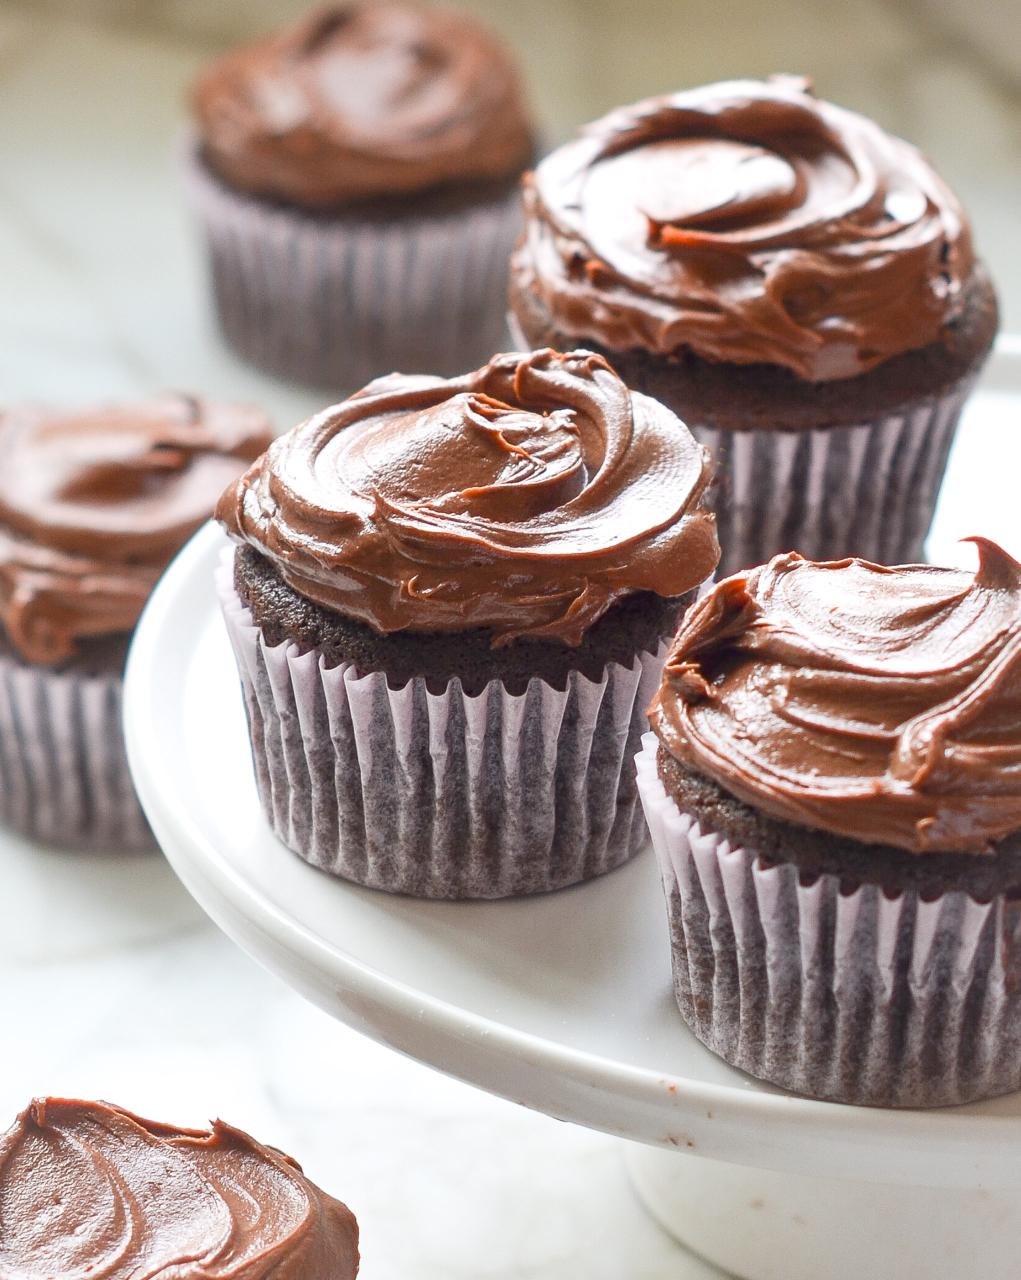 The Best Chocolate Cupcakes - Once Upon a Chef